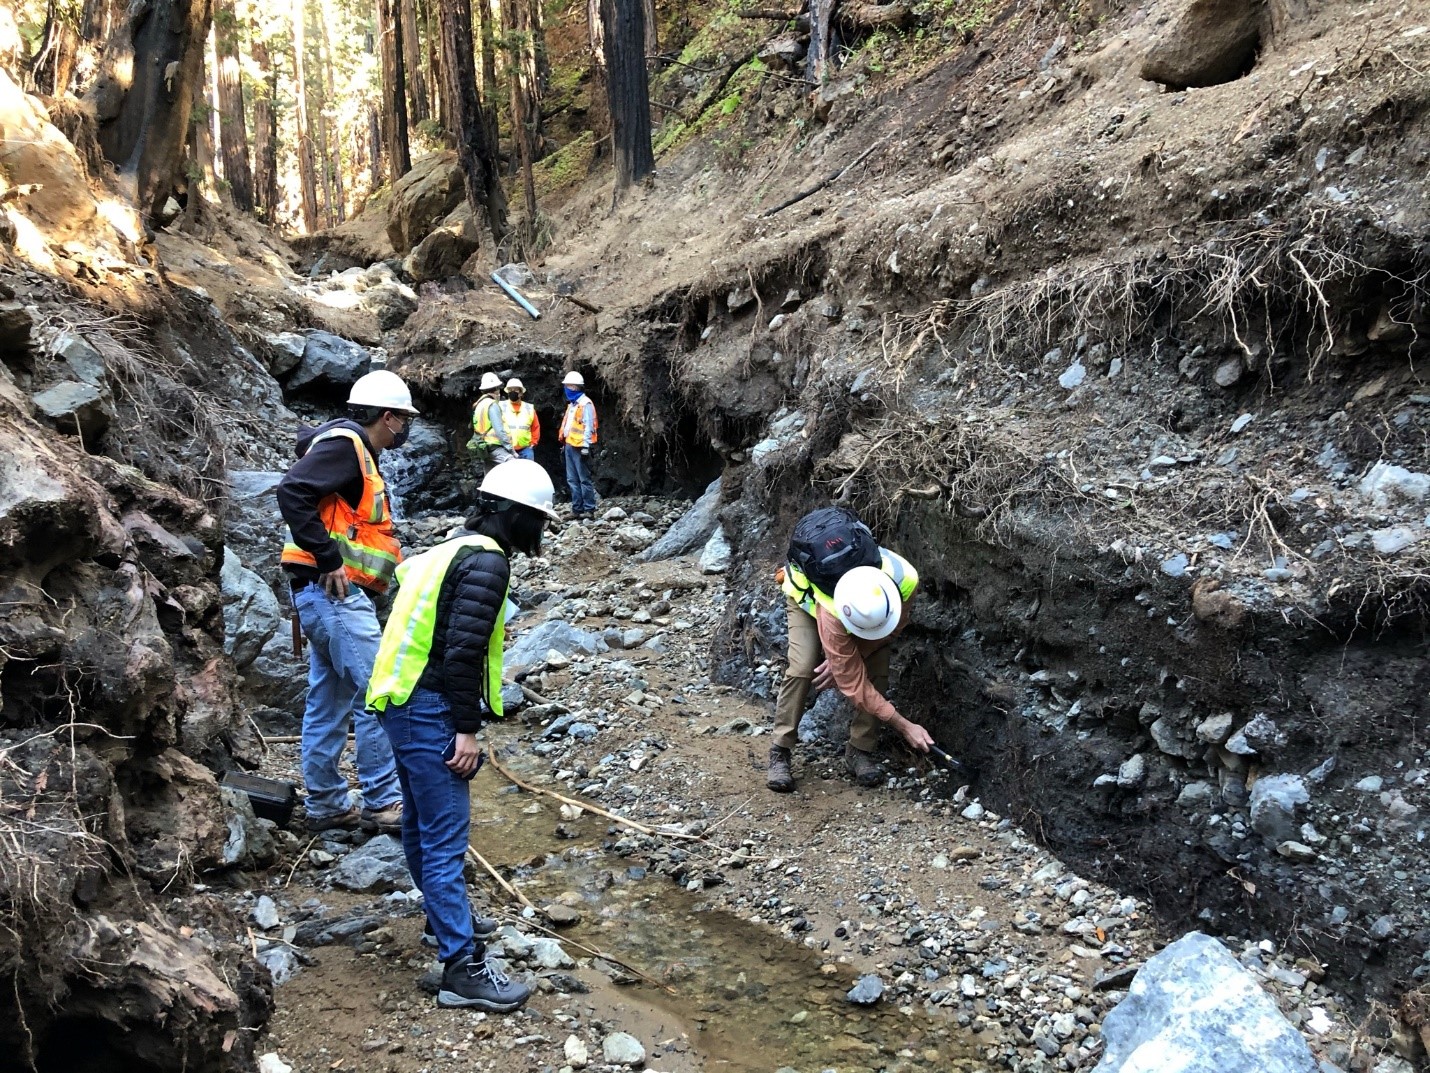 Reconnaissance team inspecting a portion of the scoured area by the debris flow that reached Highway 1.